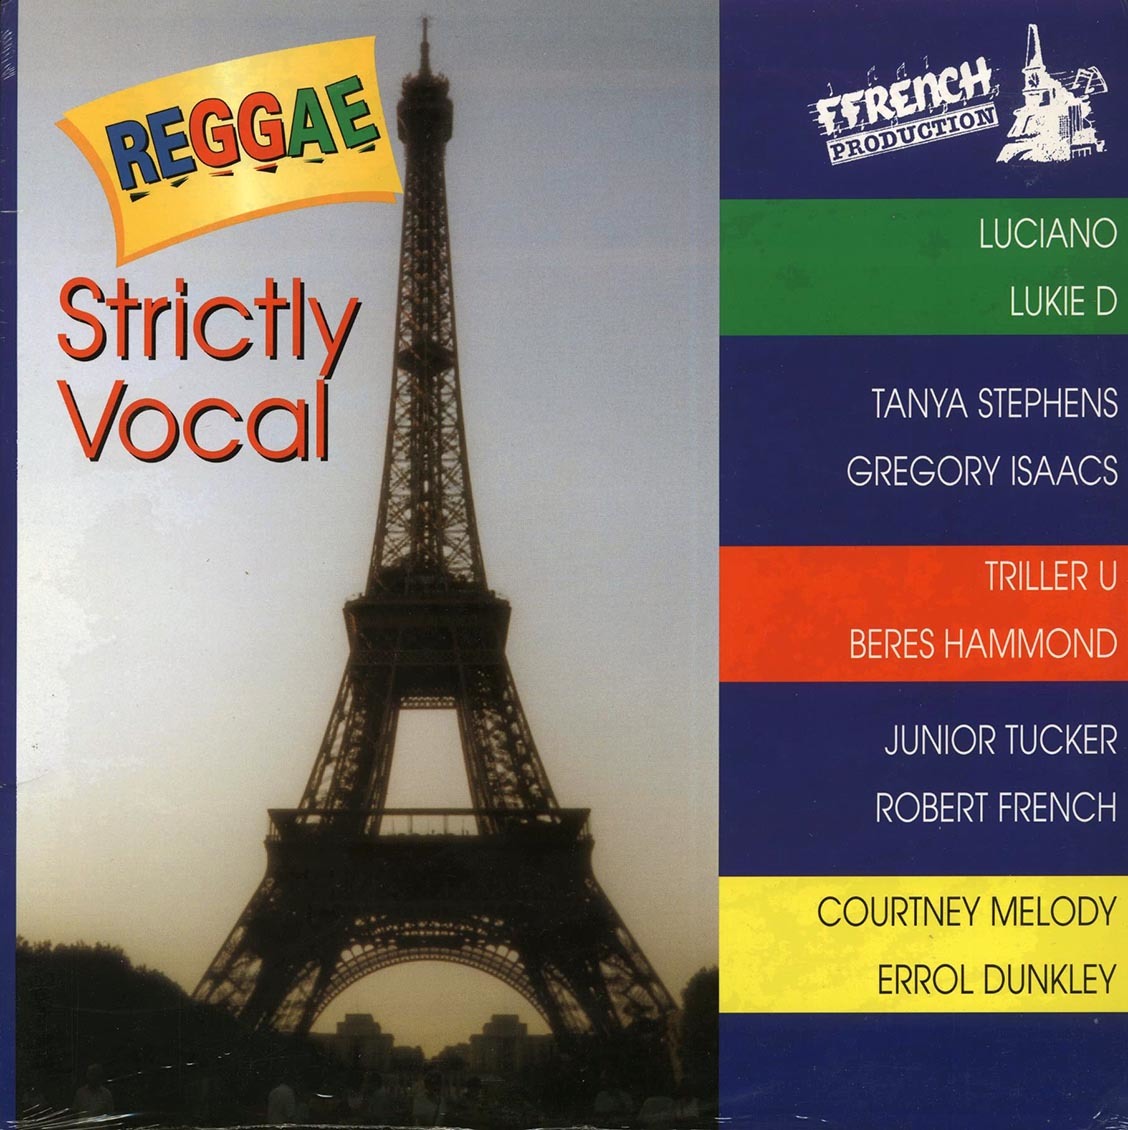 Gregory Isaacs, Luciano, Courtney Melody, Etc. - Reggae Strictly Vocal (orig. pr